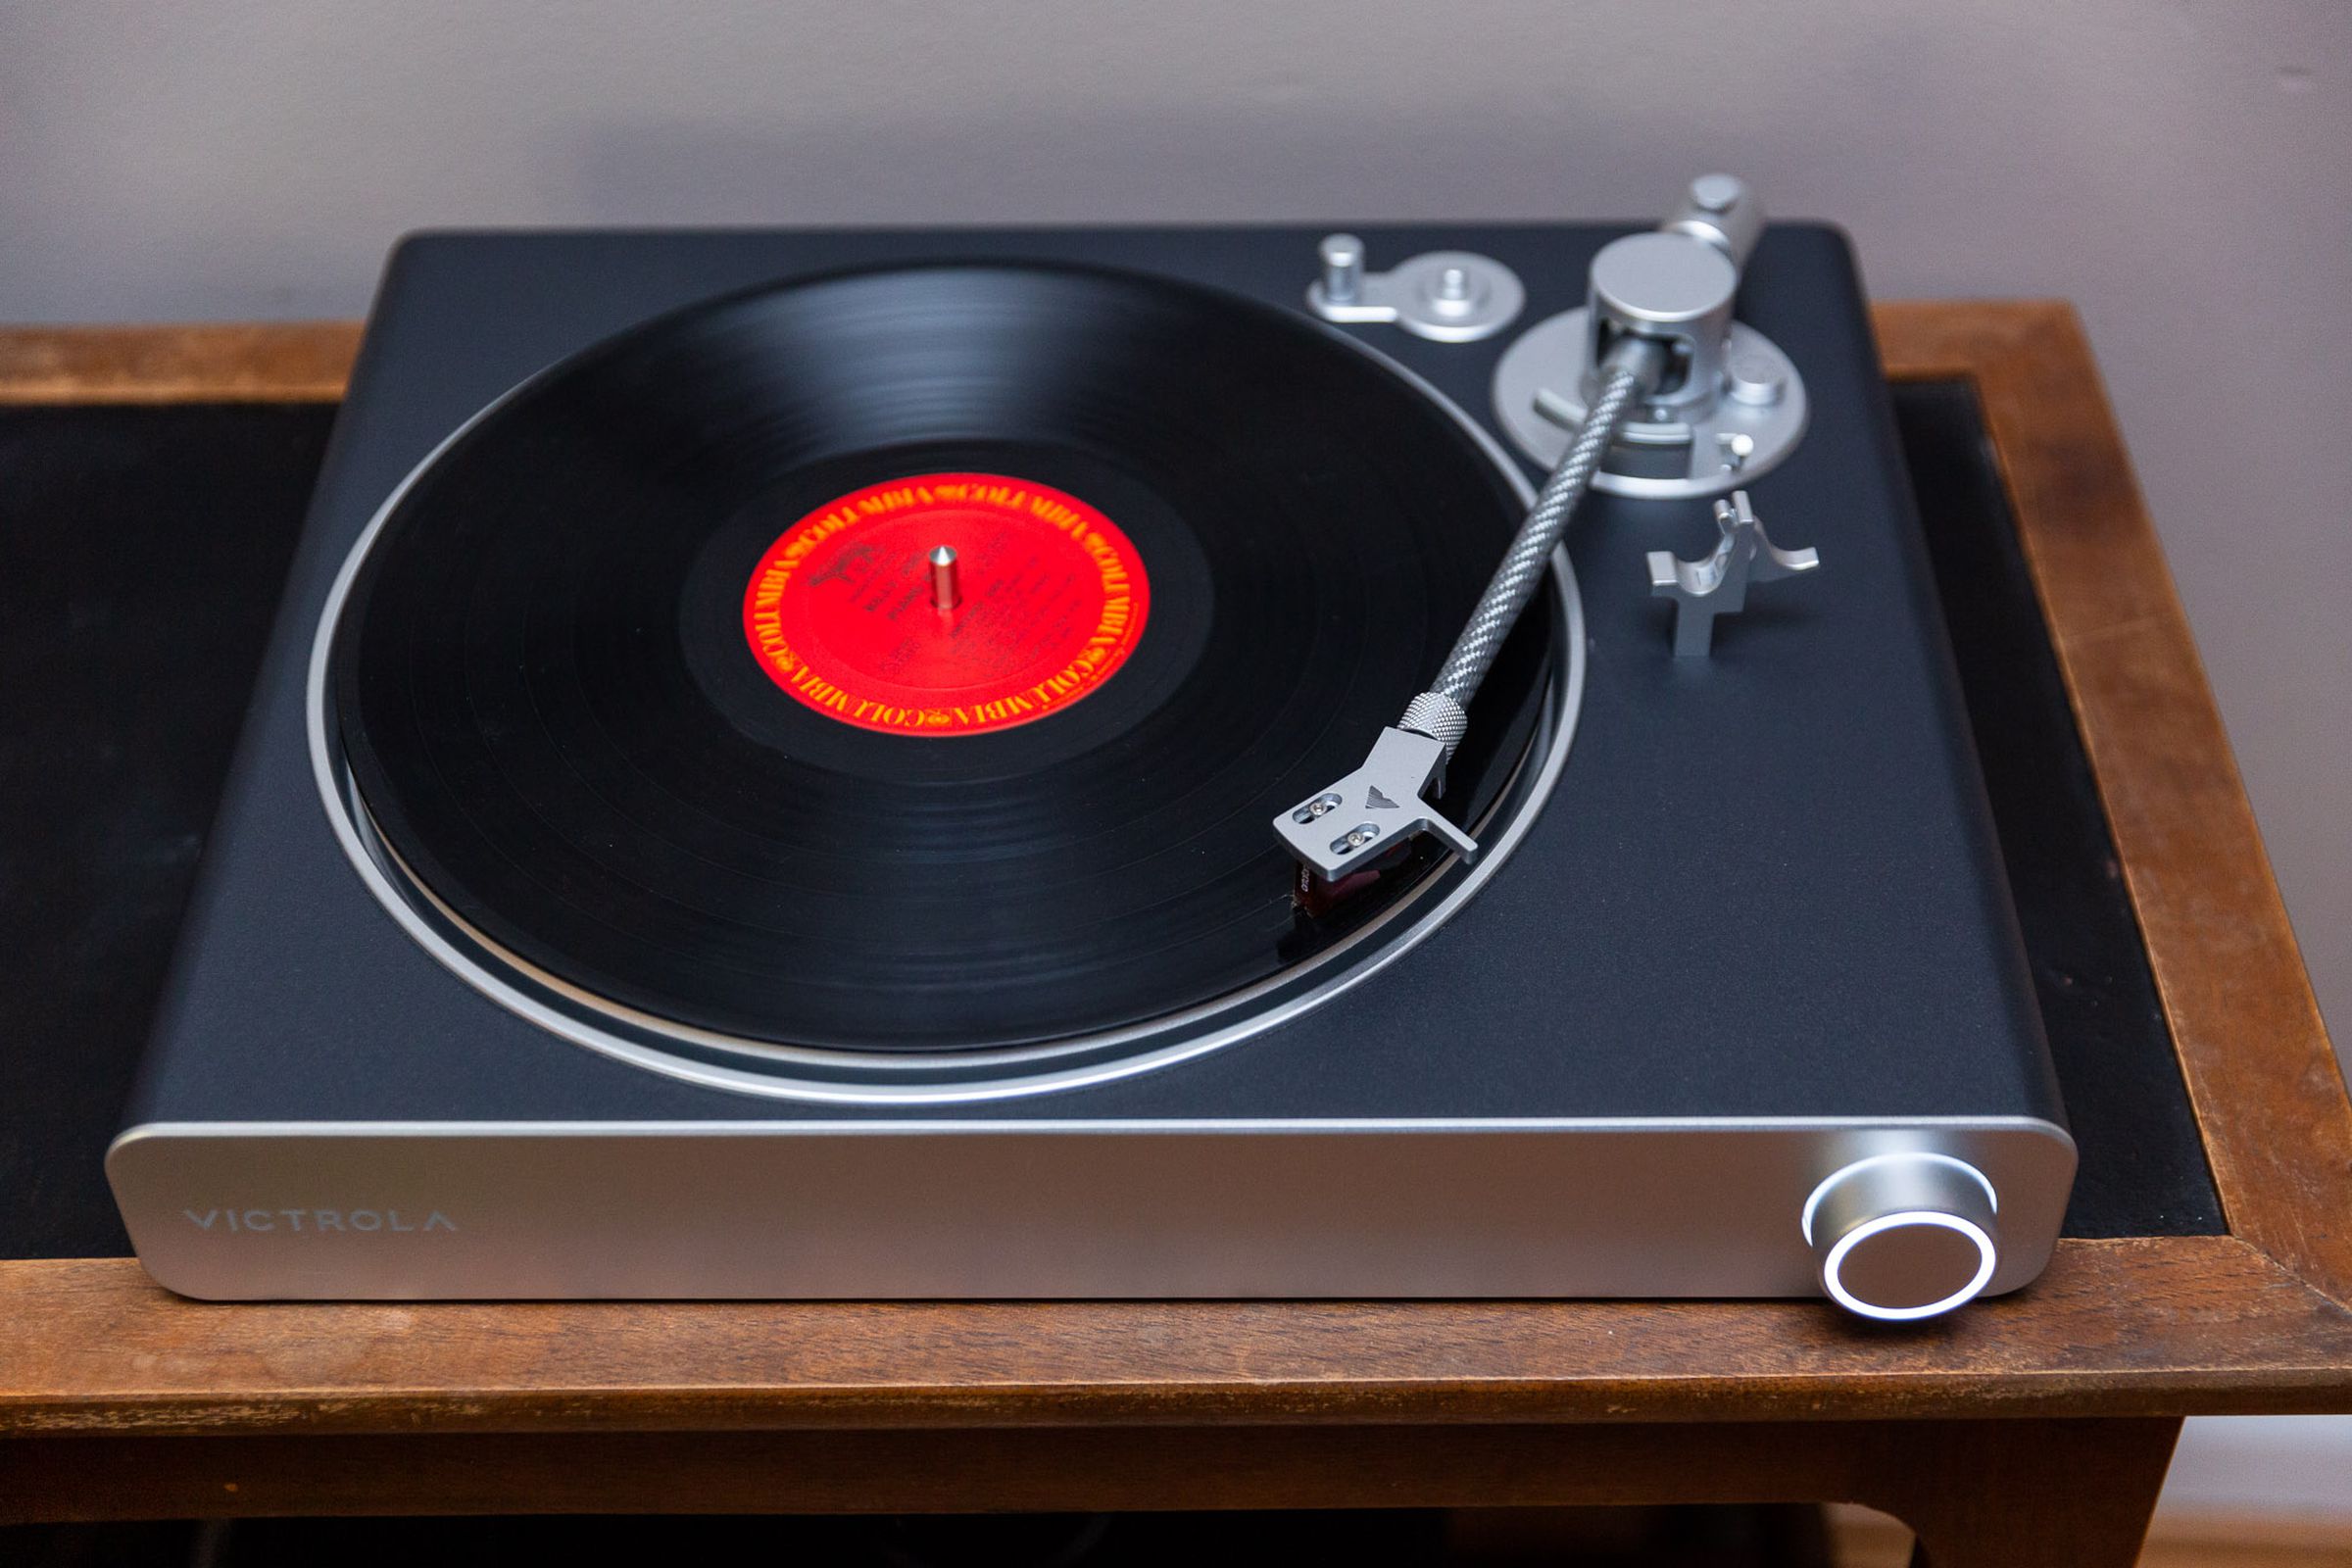 The Victrola Works with Sonos vinyl turntable is $100 off. 